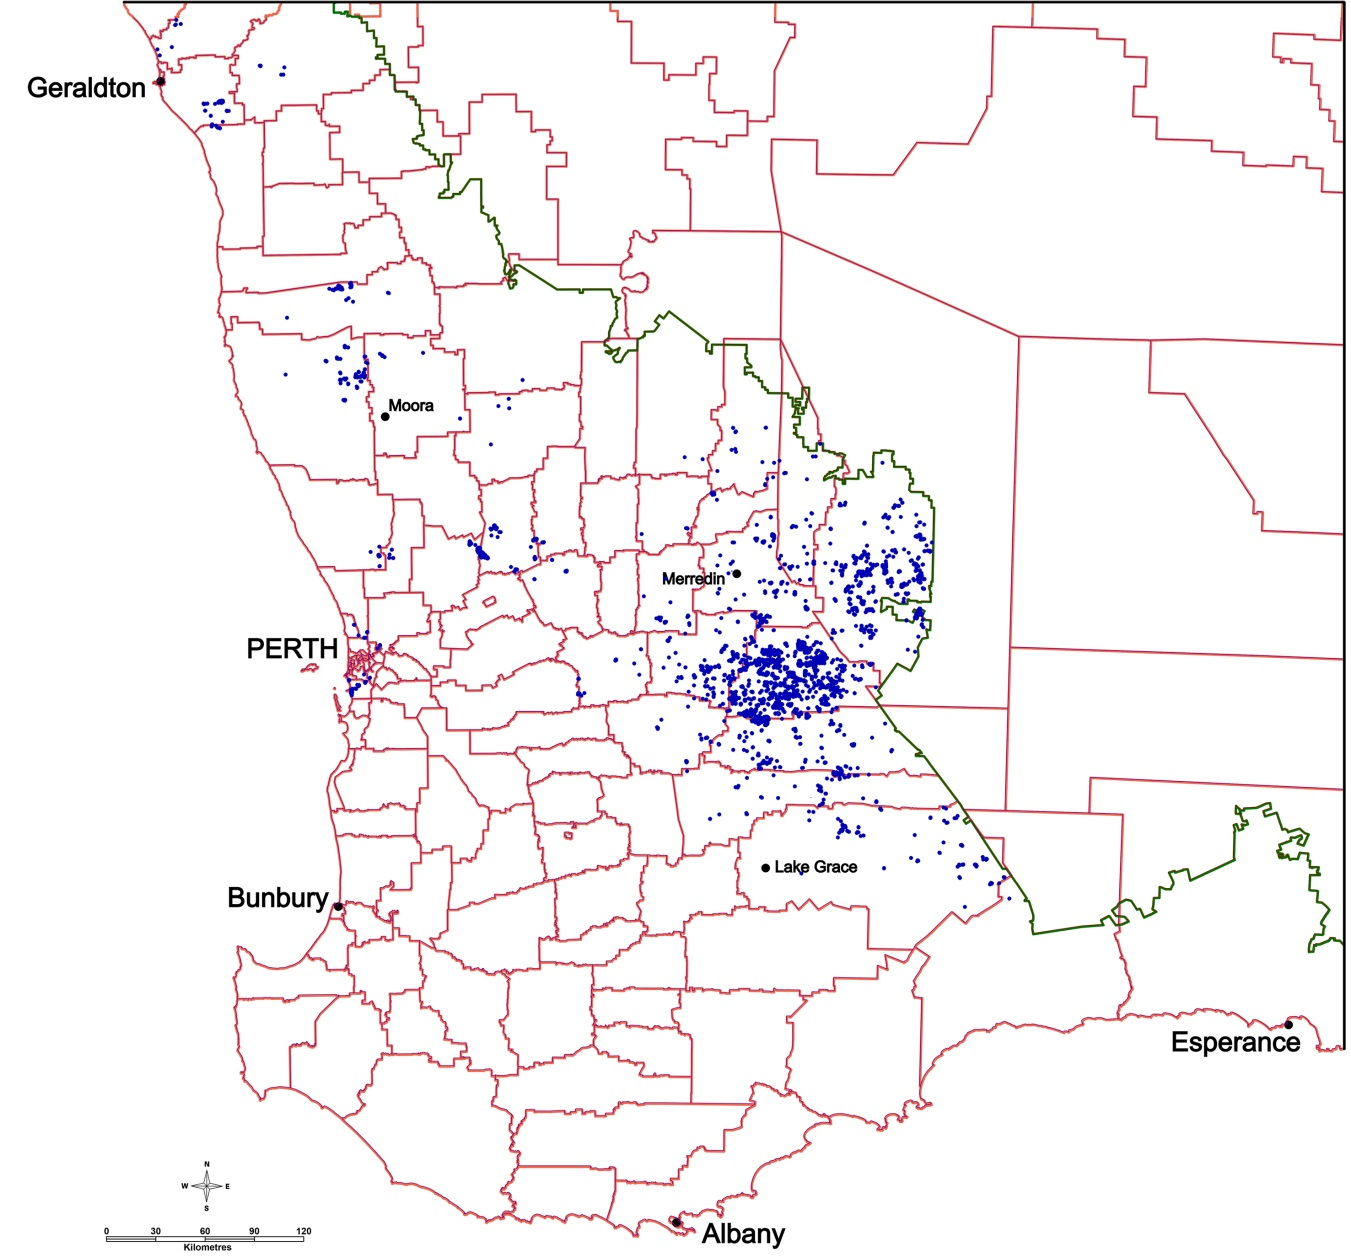 45 shires within the Western Australian agricultural region have infestations of skeleton weed. Infestations are concentrated in the eastern wheatbelt, but can be found from Northampton through to Lake Grace, and into Perth